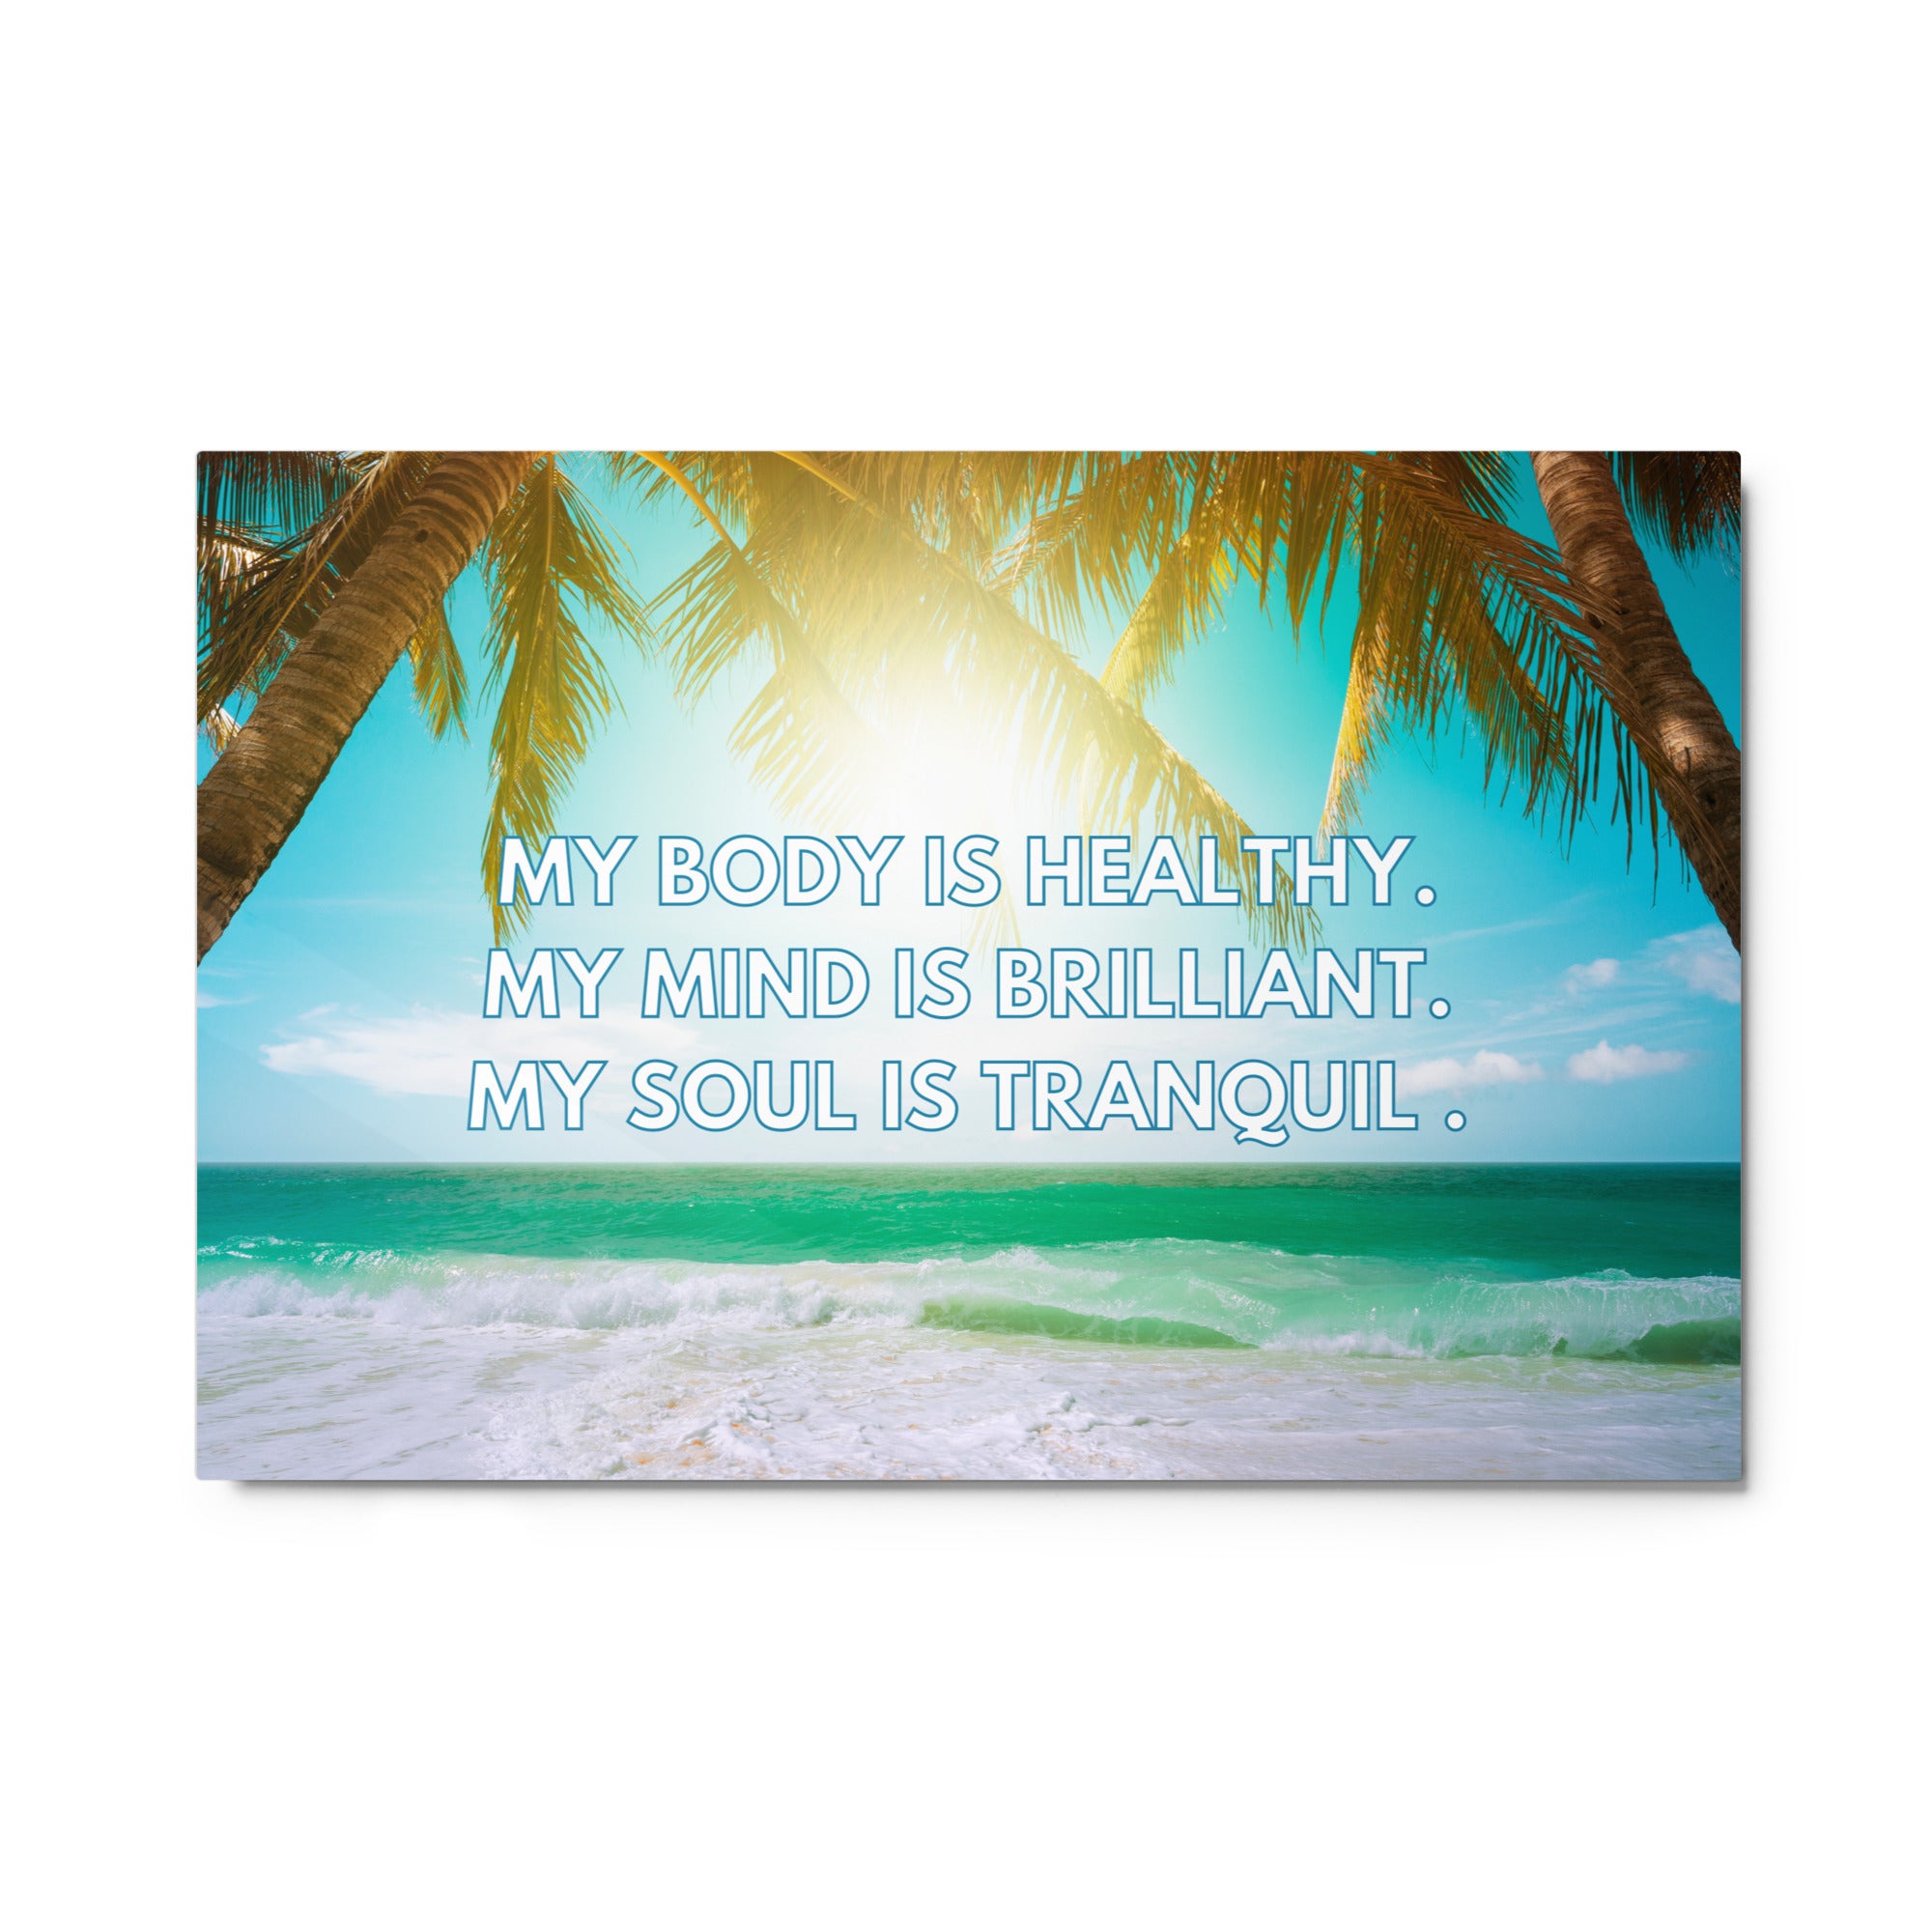 Mу Bоdу Iѕ Healthy; Mу Mind Iѕ Brilliant; My Soul Is Tranquil. | Glossy Metal Print  Success Acceleration Tools